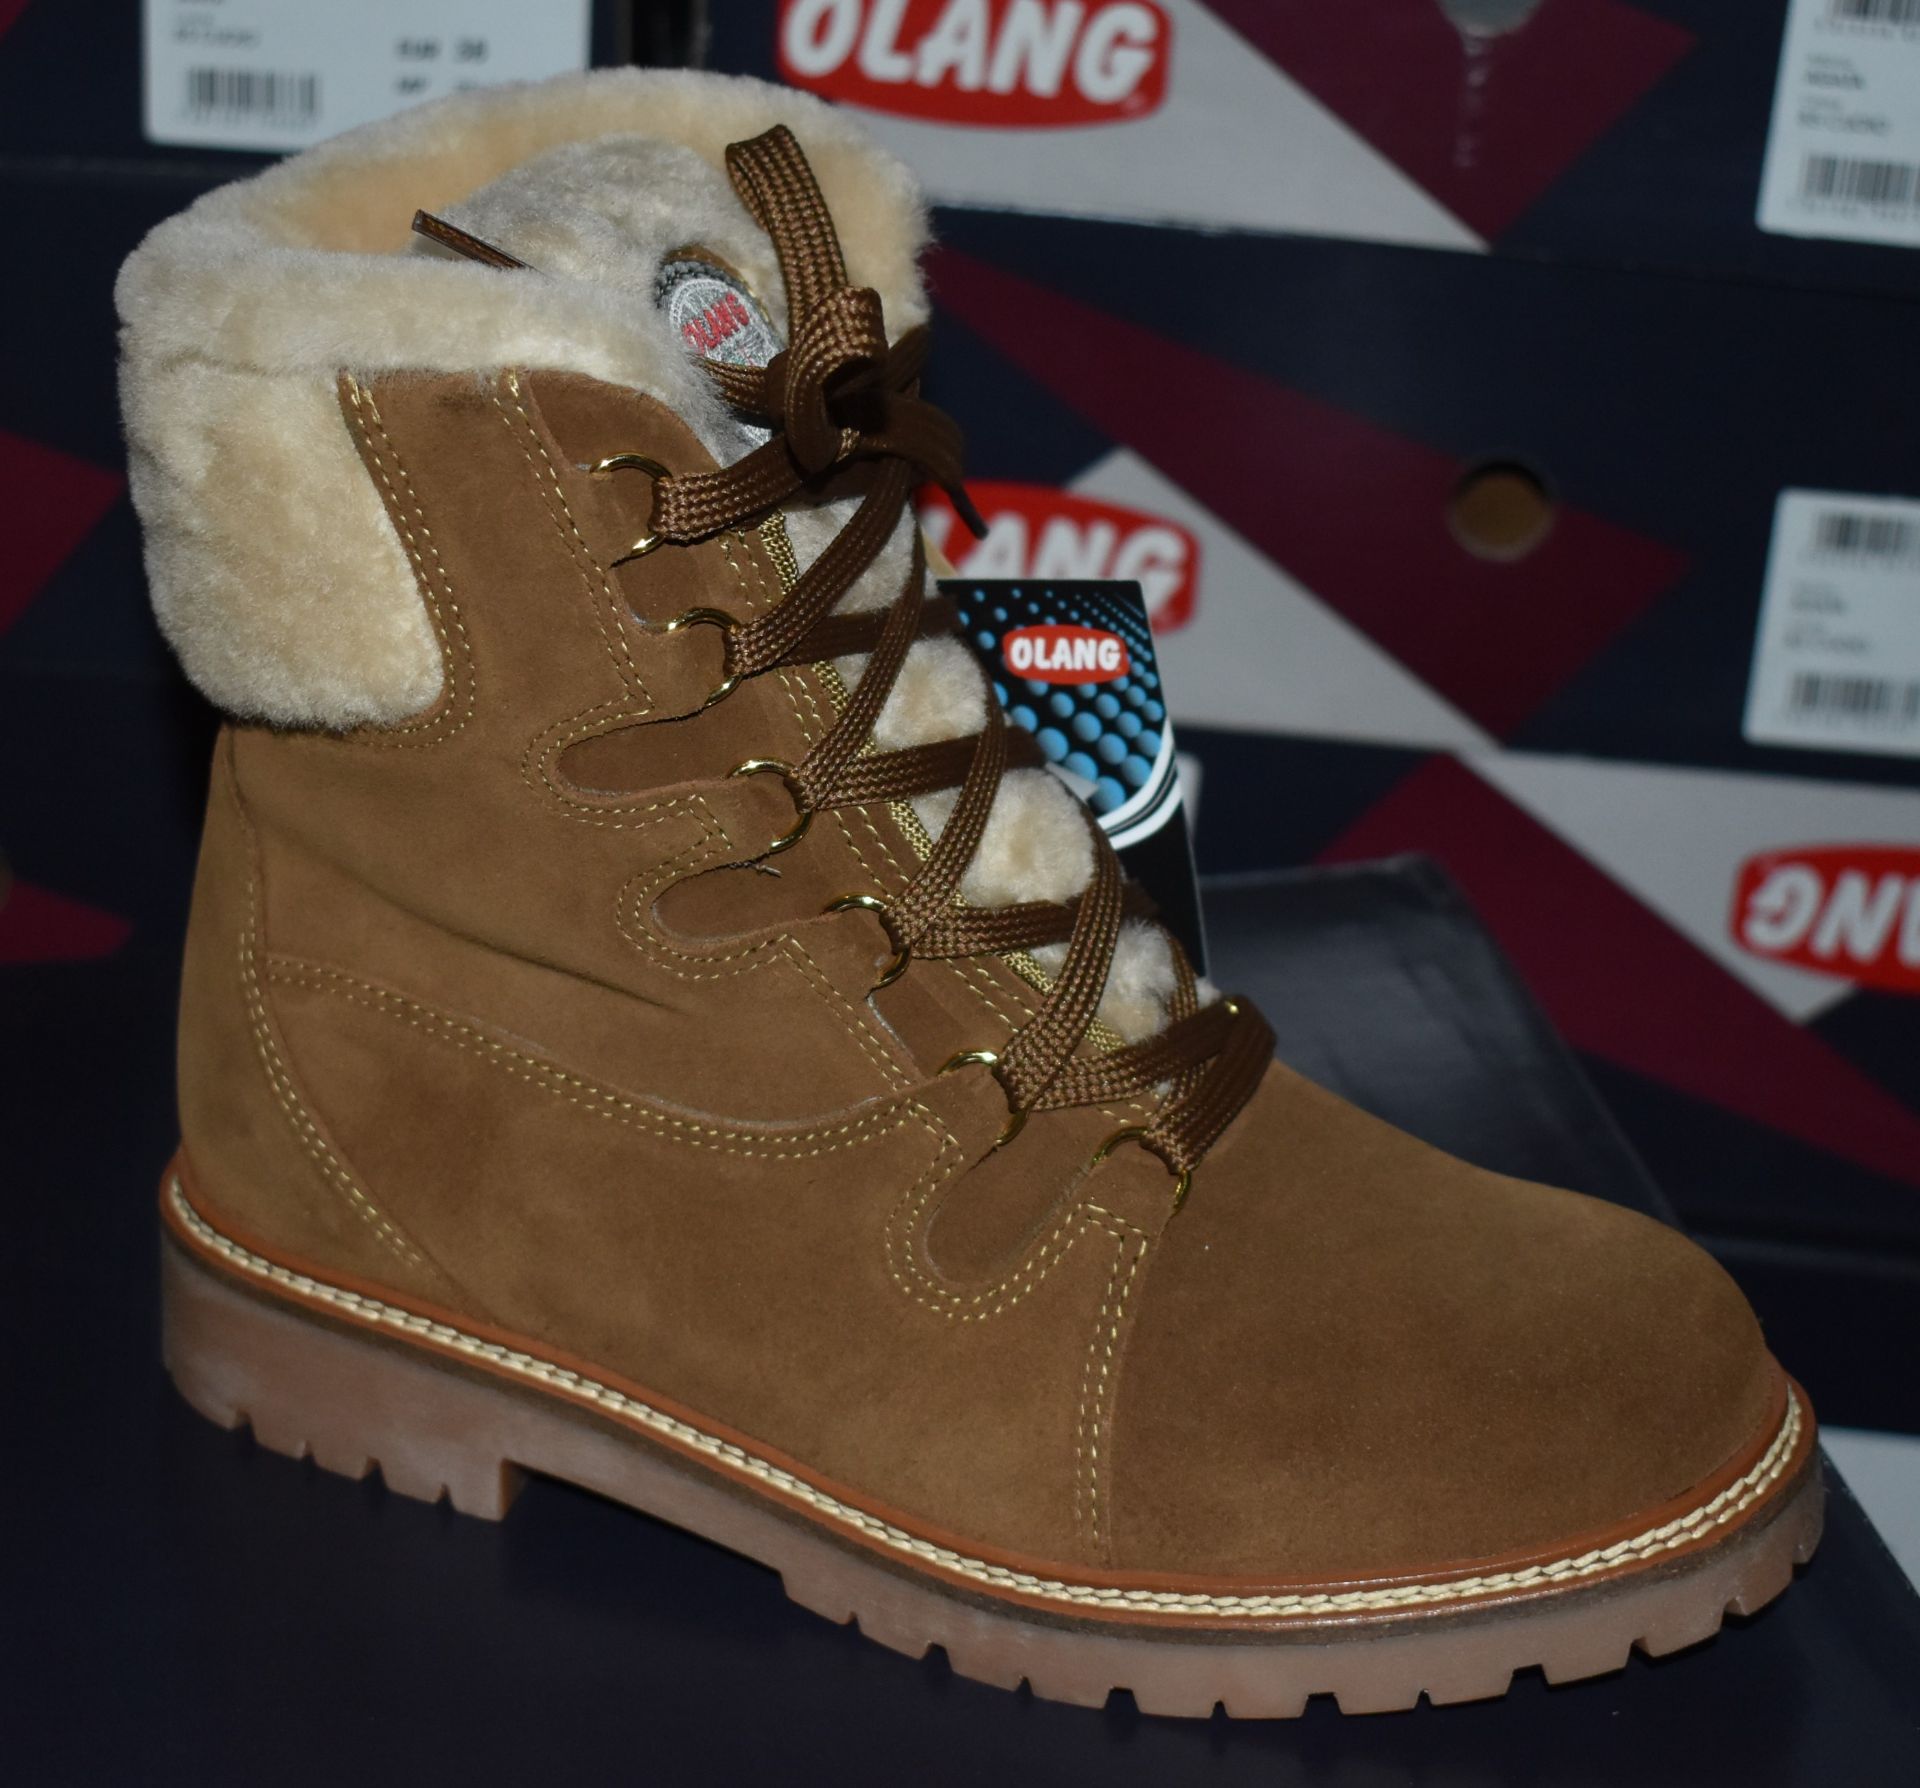 1 x Pair of Designer Olang Meribel 85 CUOIO Women's Winter Boots - Euro Size 38 - Brand New Boxed - Image 8 of 8